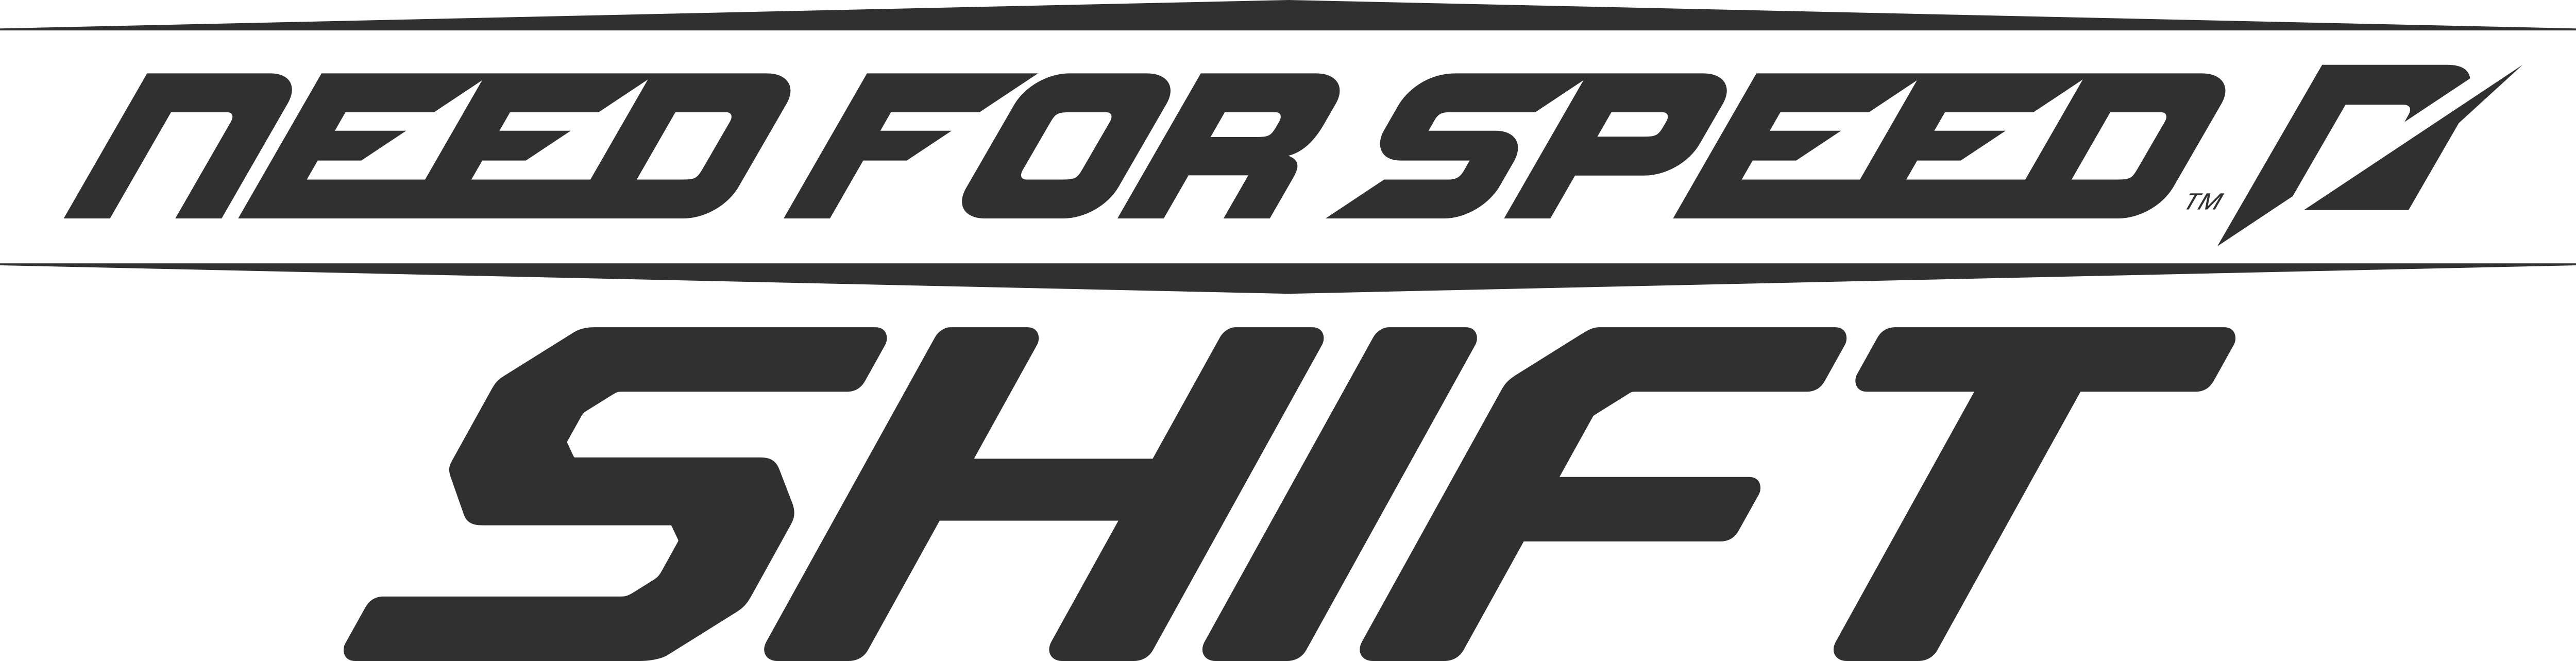 Need For Speed Logo Transparent Background